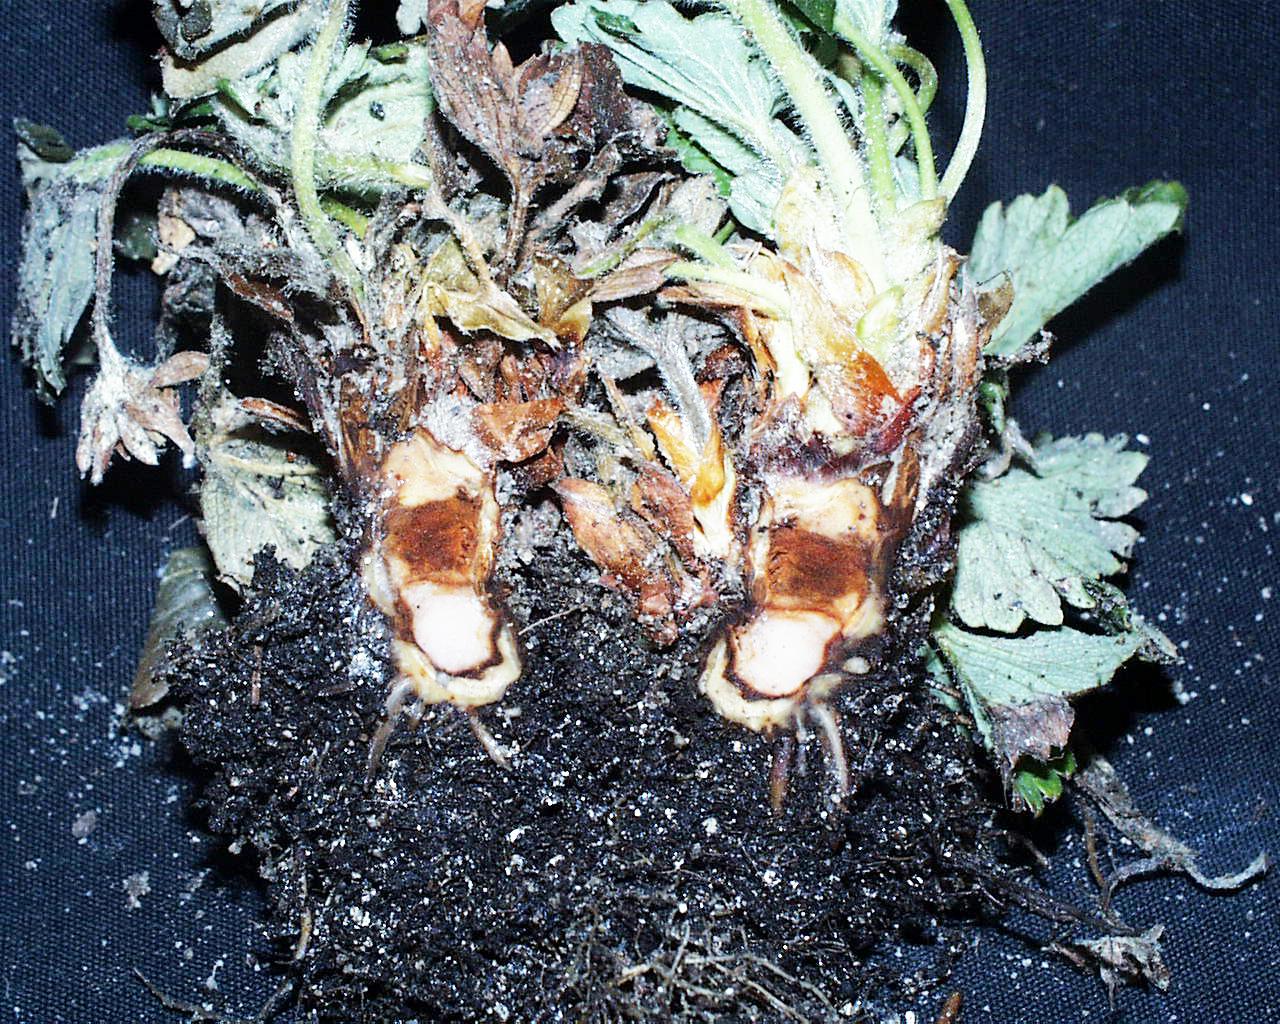 Phytophthora crown and root rot (Louws, North Carolina State University)